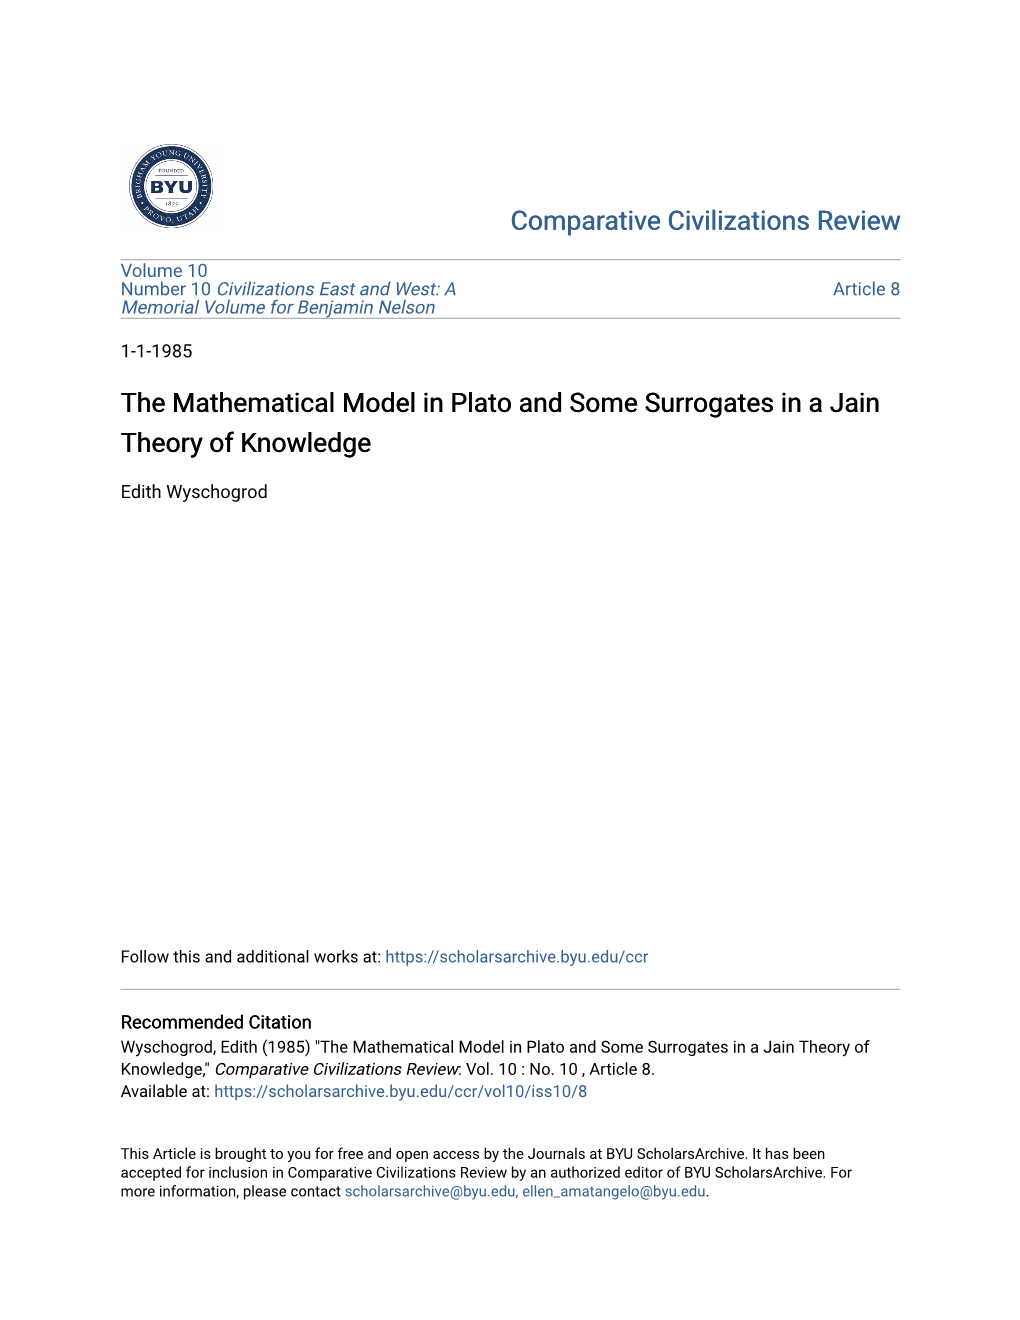 The Mathematical Model in Plato and Some Surrogates in a Jain Theory of Knowledge